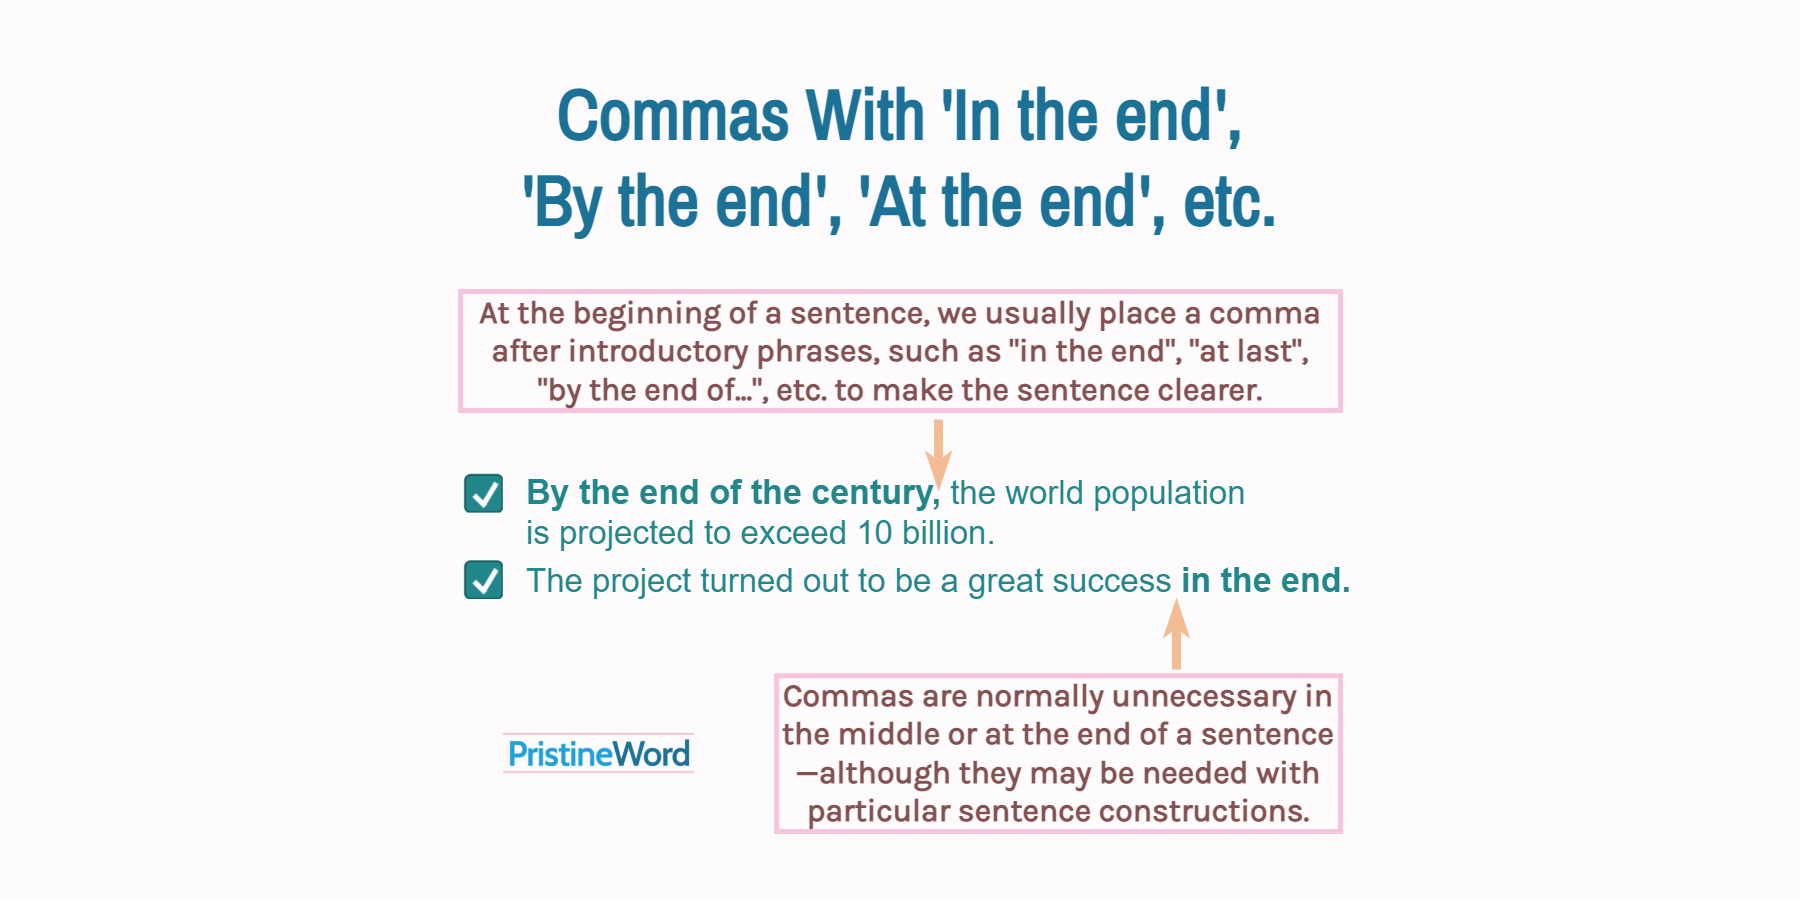 commas-after-in-the-end-at-last-at-the-end-etc